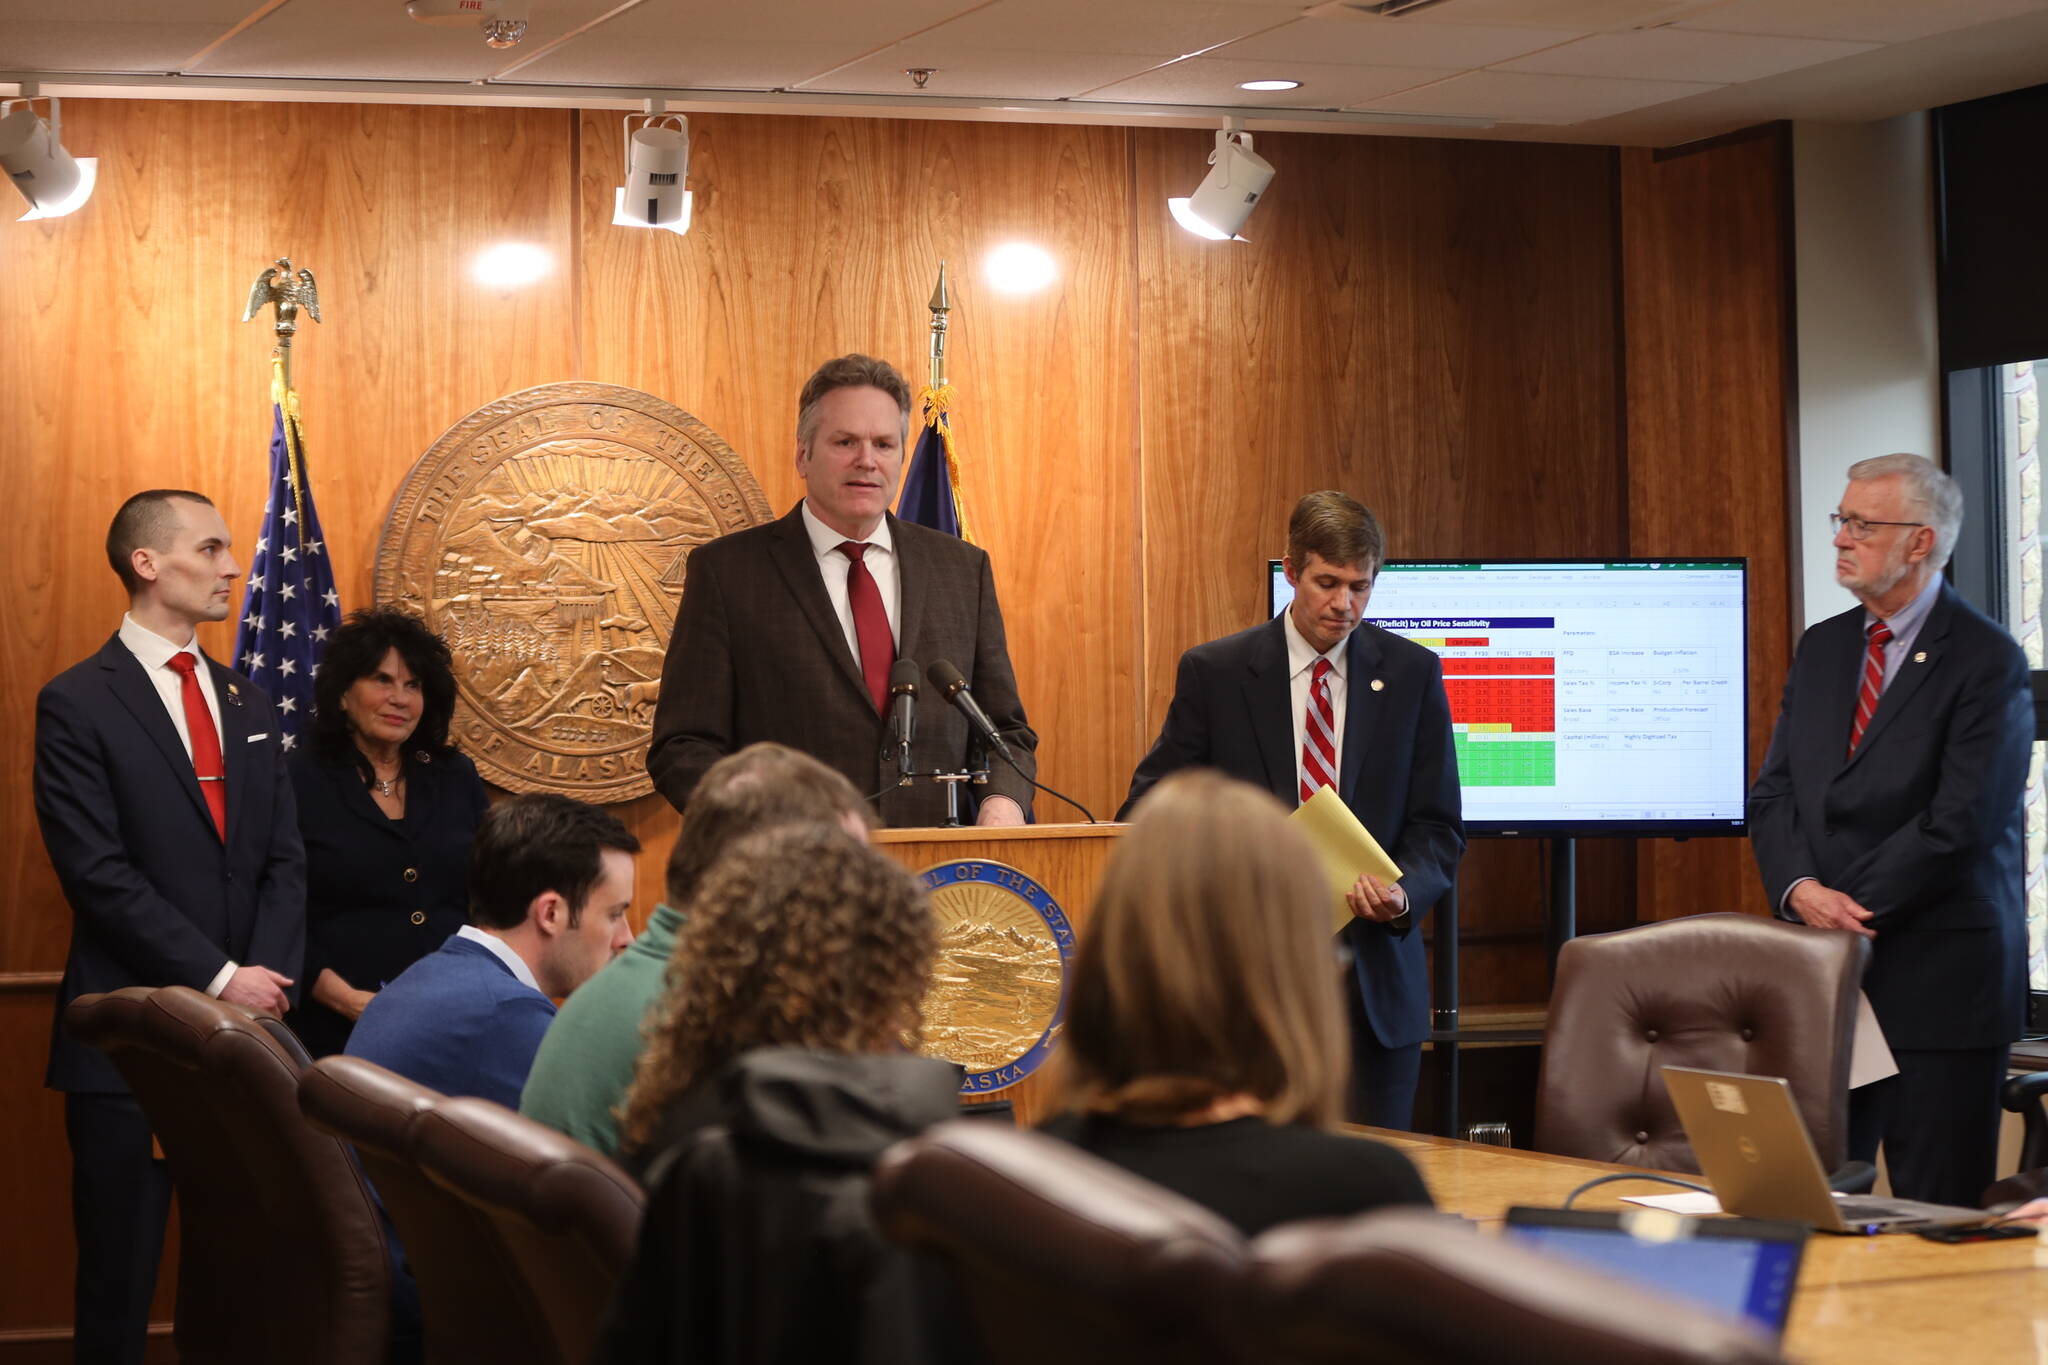 Gov. Mike Dunleavy, accompanied by state House and Senate leaders, discuss options for a long-range fiscal plan during a press conference Thursday at the Alaska State Capitol. (Clarise Larson / Juneau Empire)